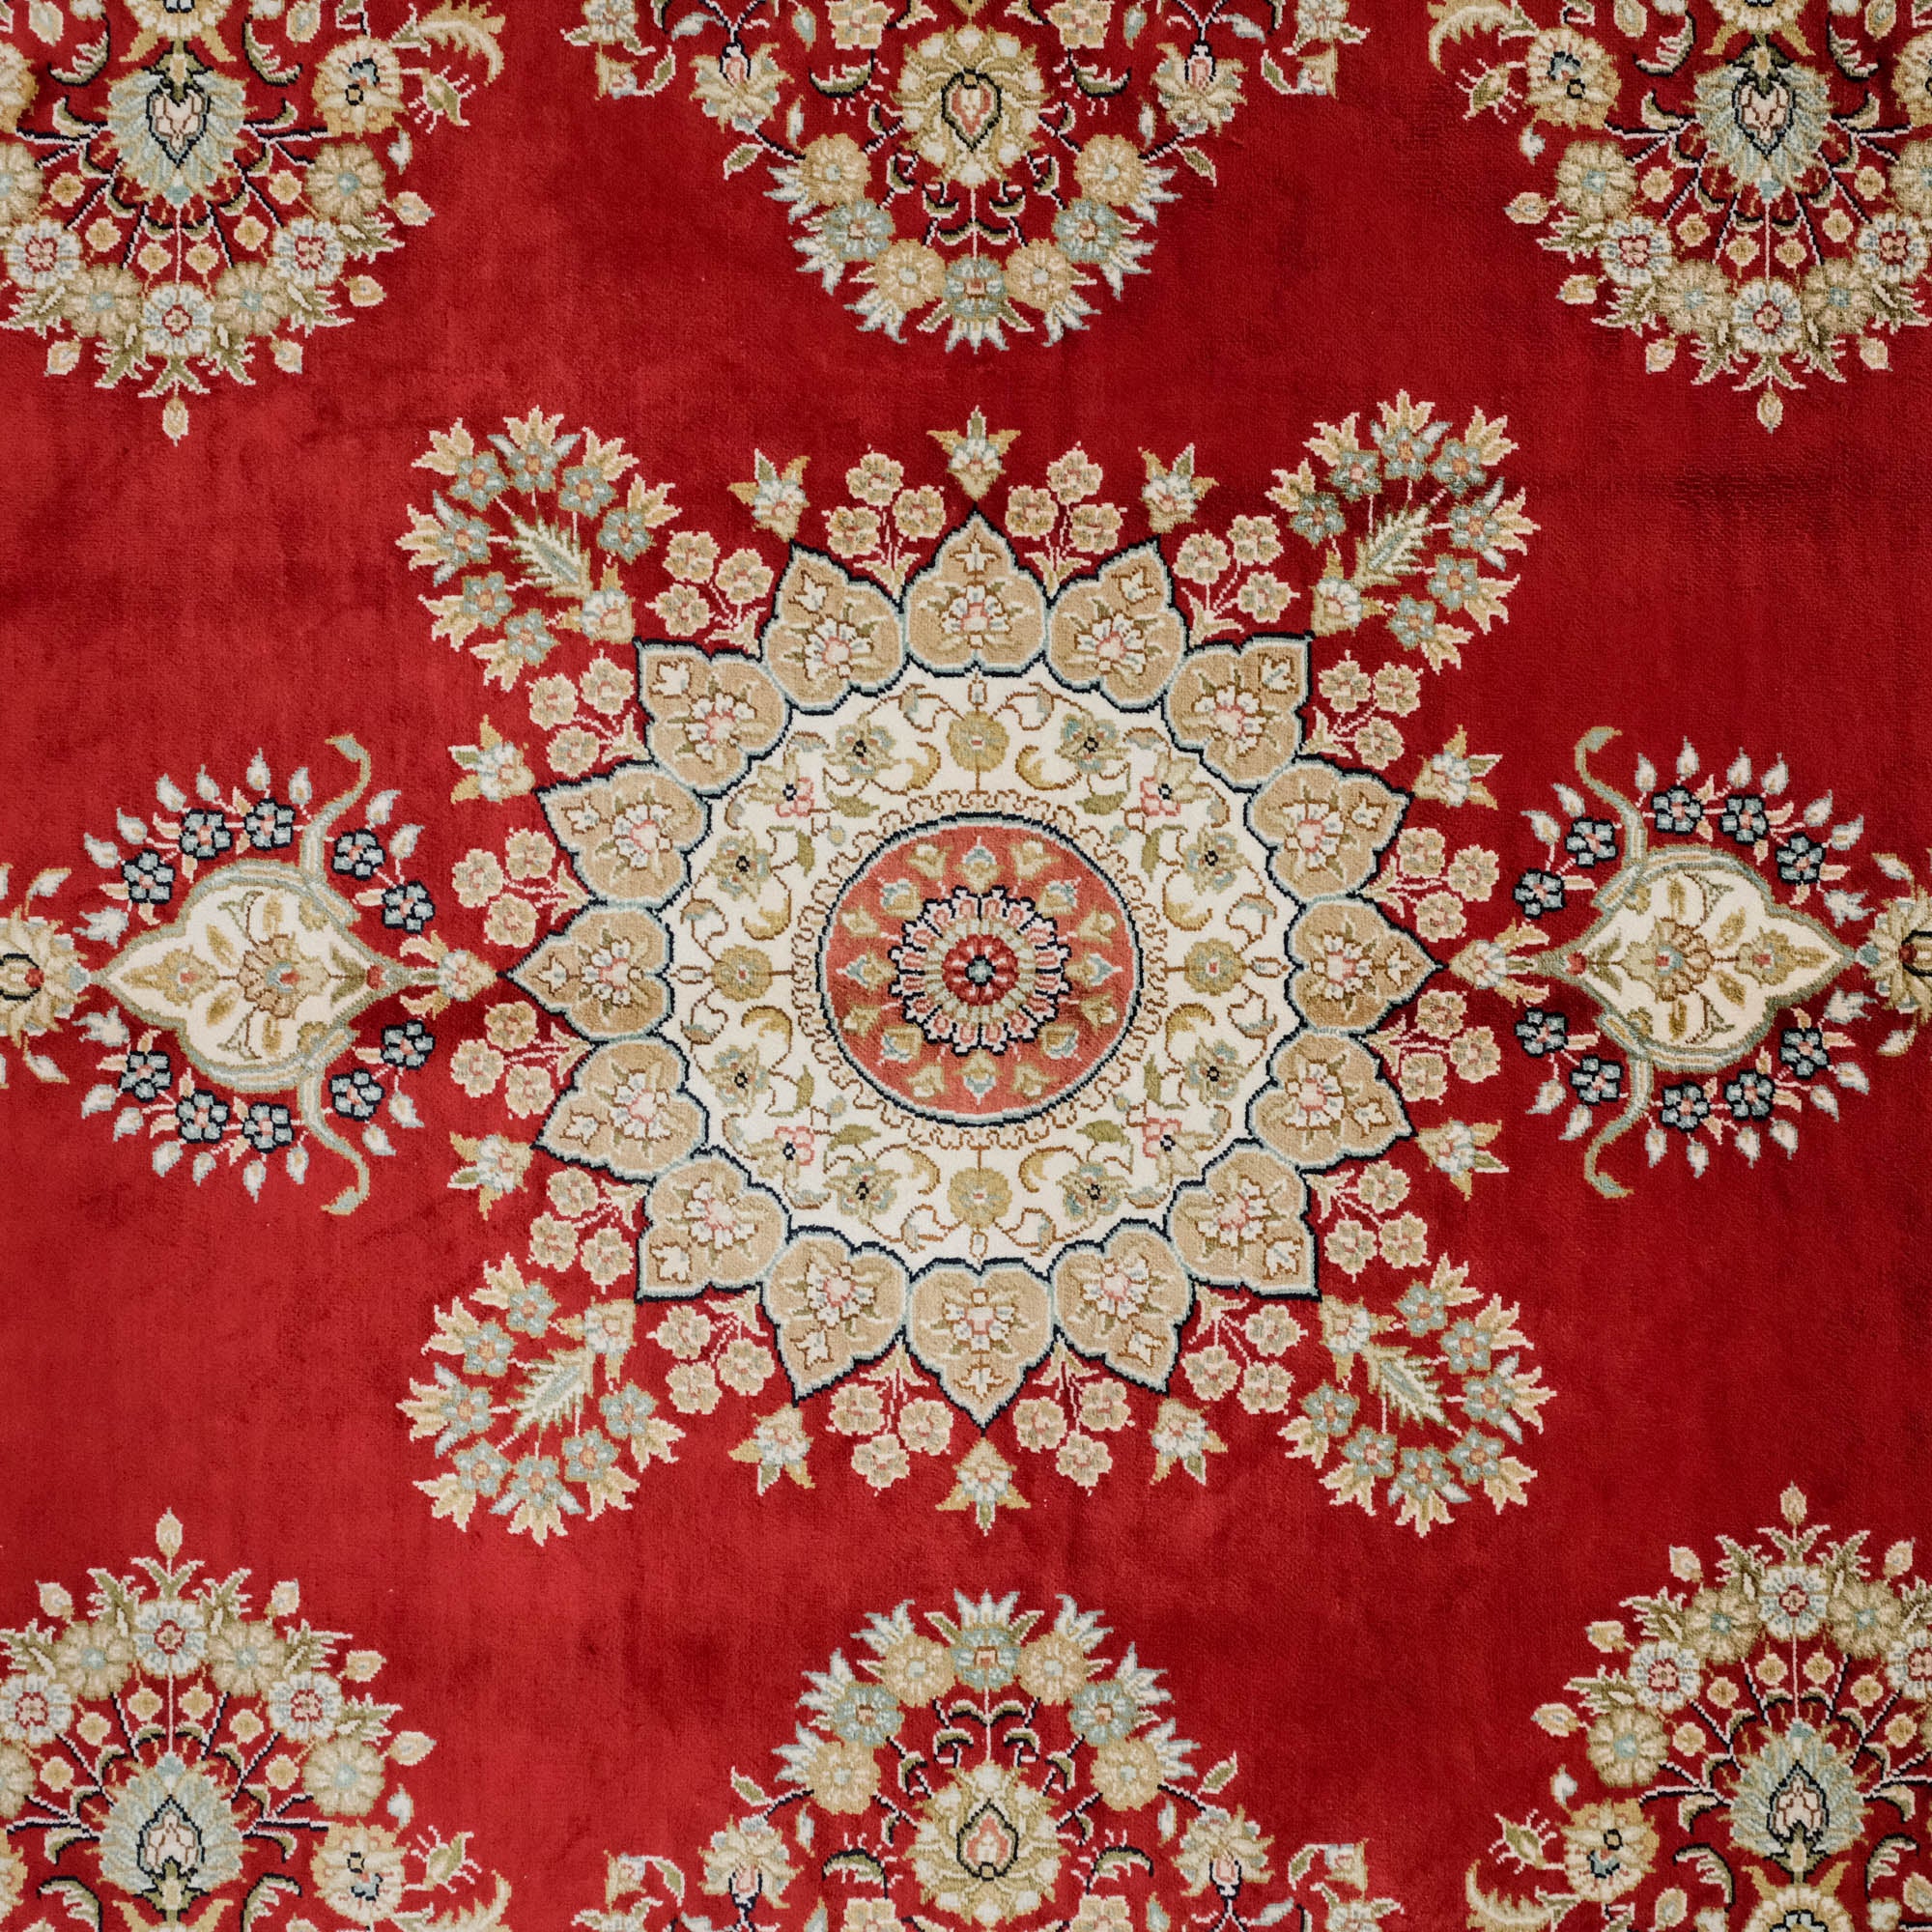 Hand-Woven Frame Patterned Red Carpet